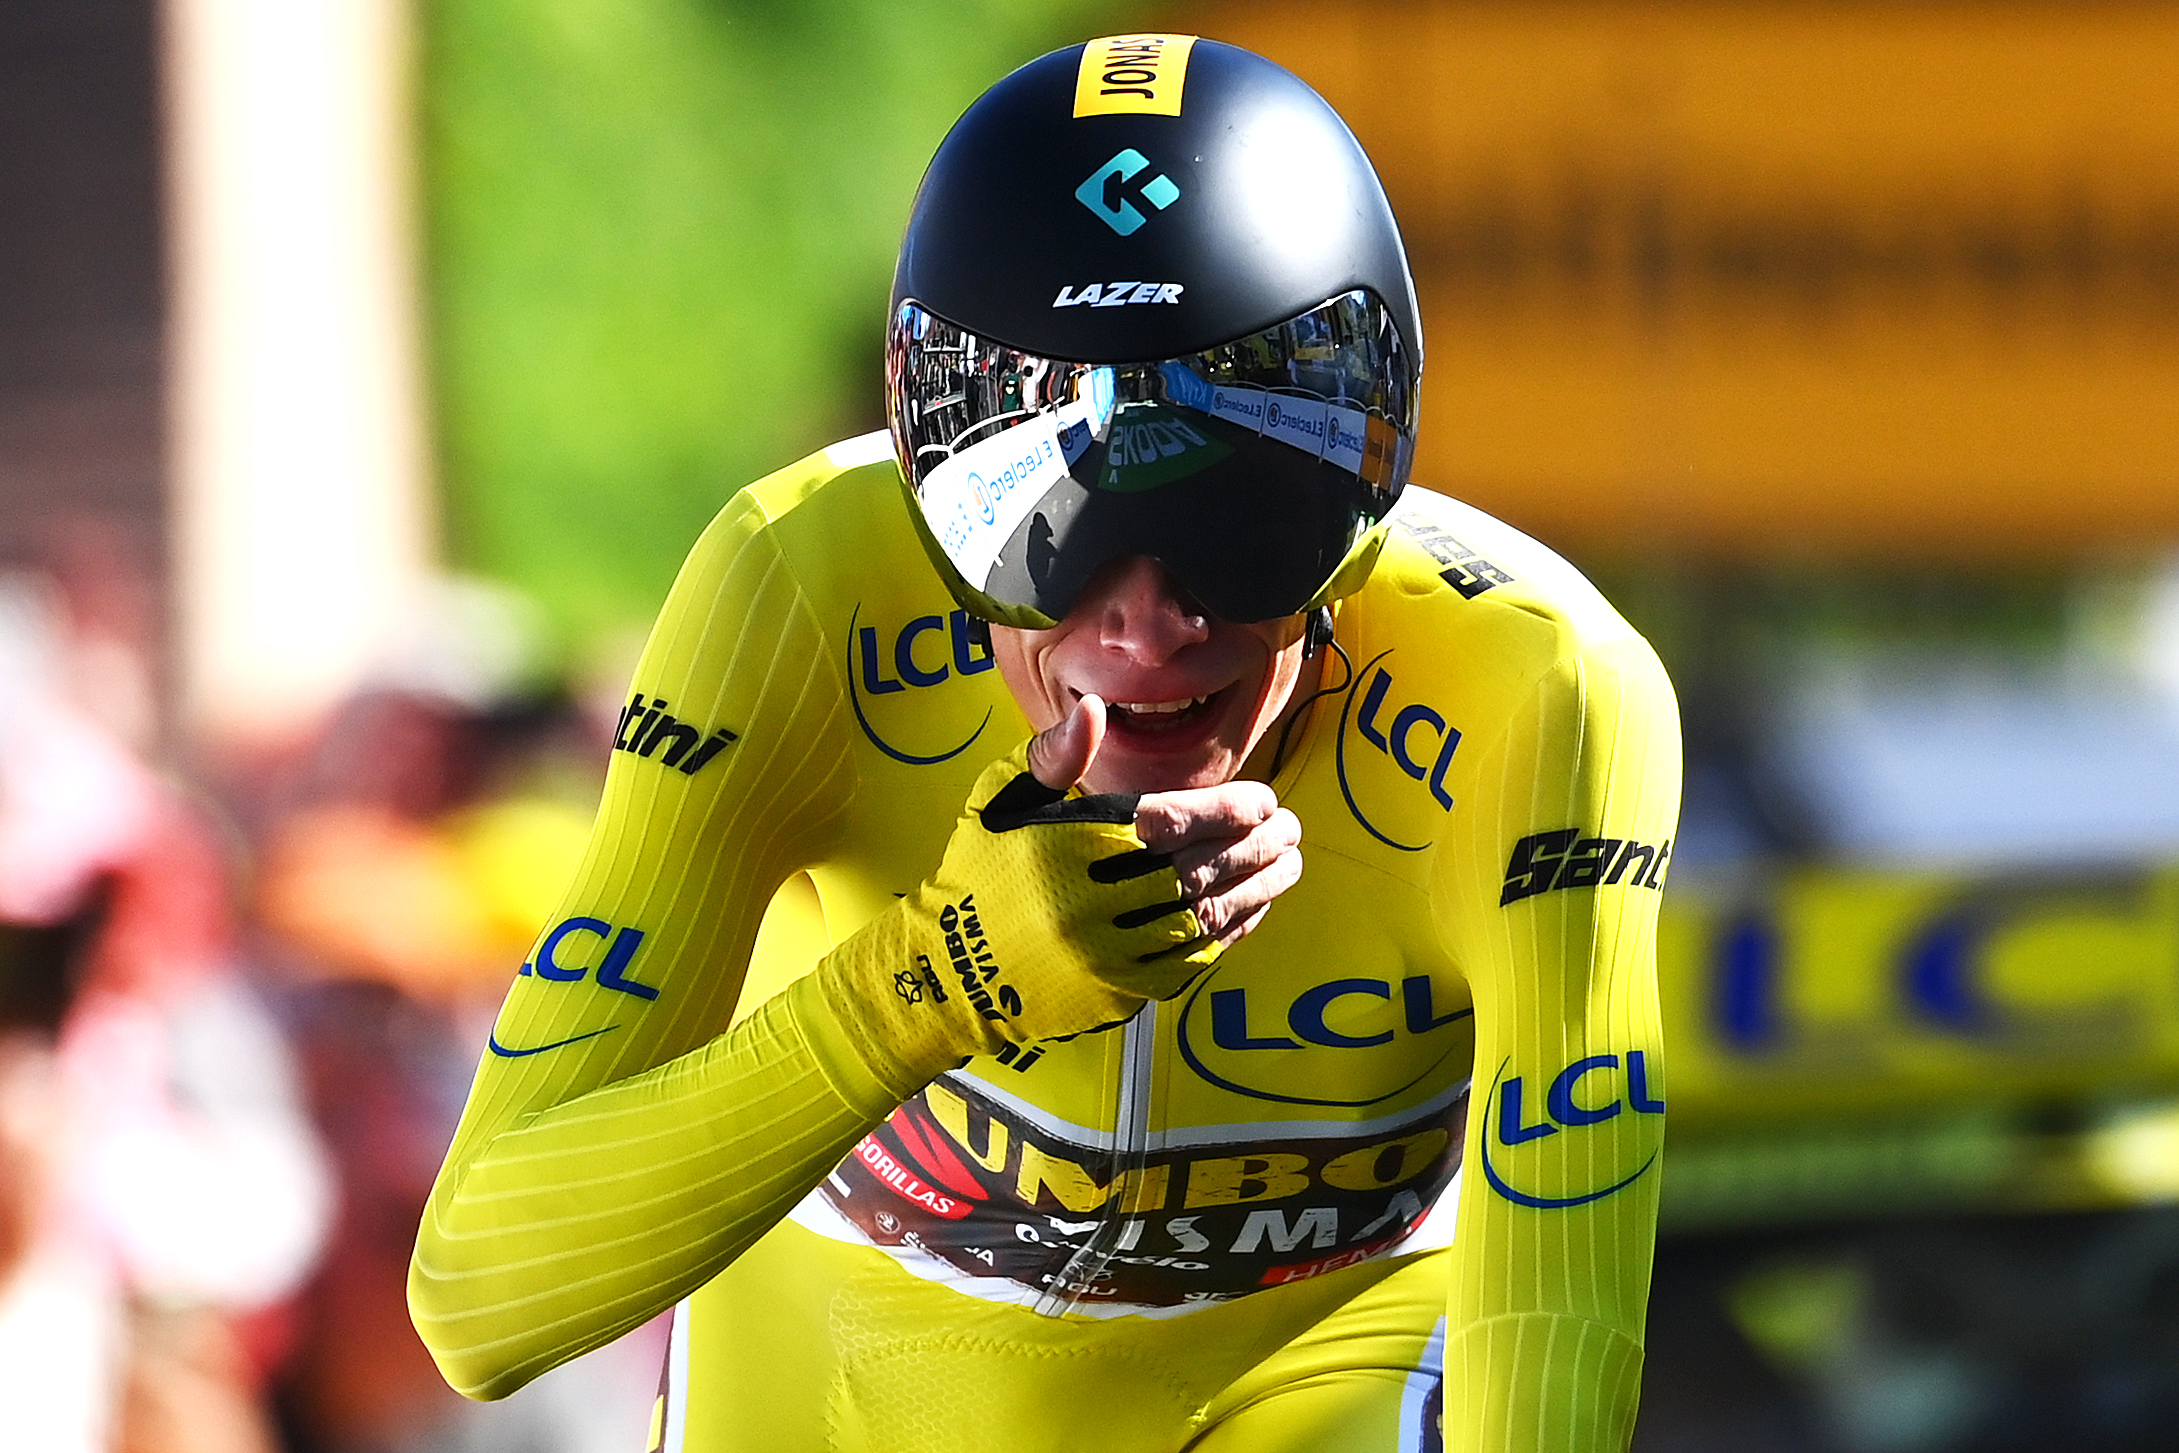 Jonas Vingegaard Rasmussen of Denmark and Team Jumbo - Visma Yellow Leader Jersey crosses the finish line during the 109th Tour de France 2022, Stage 20 a 40,7km individual time trial from Lacapelle-Marival to Rocamadour / #TDF2022 / #WorldTour / on July 23, 2022 in Rocamadour, France.